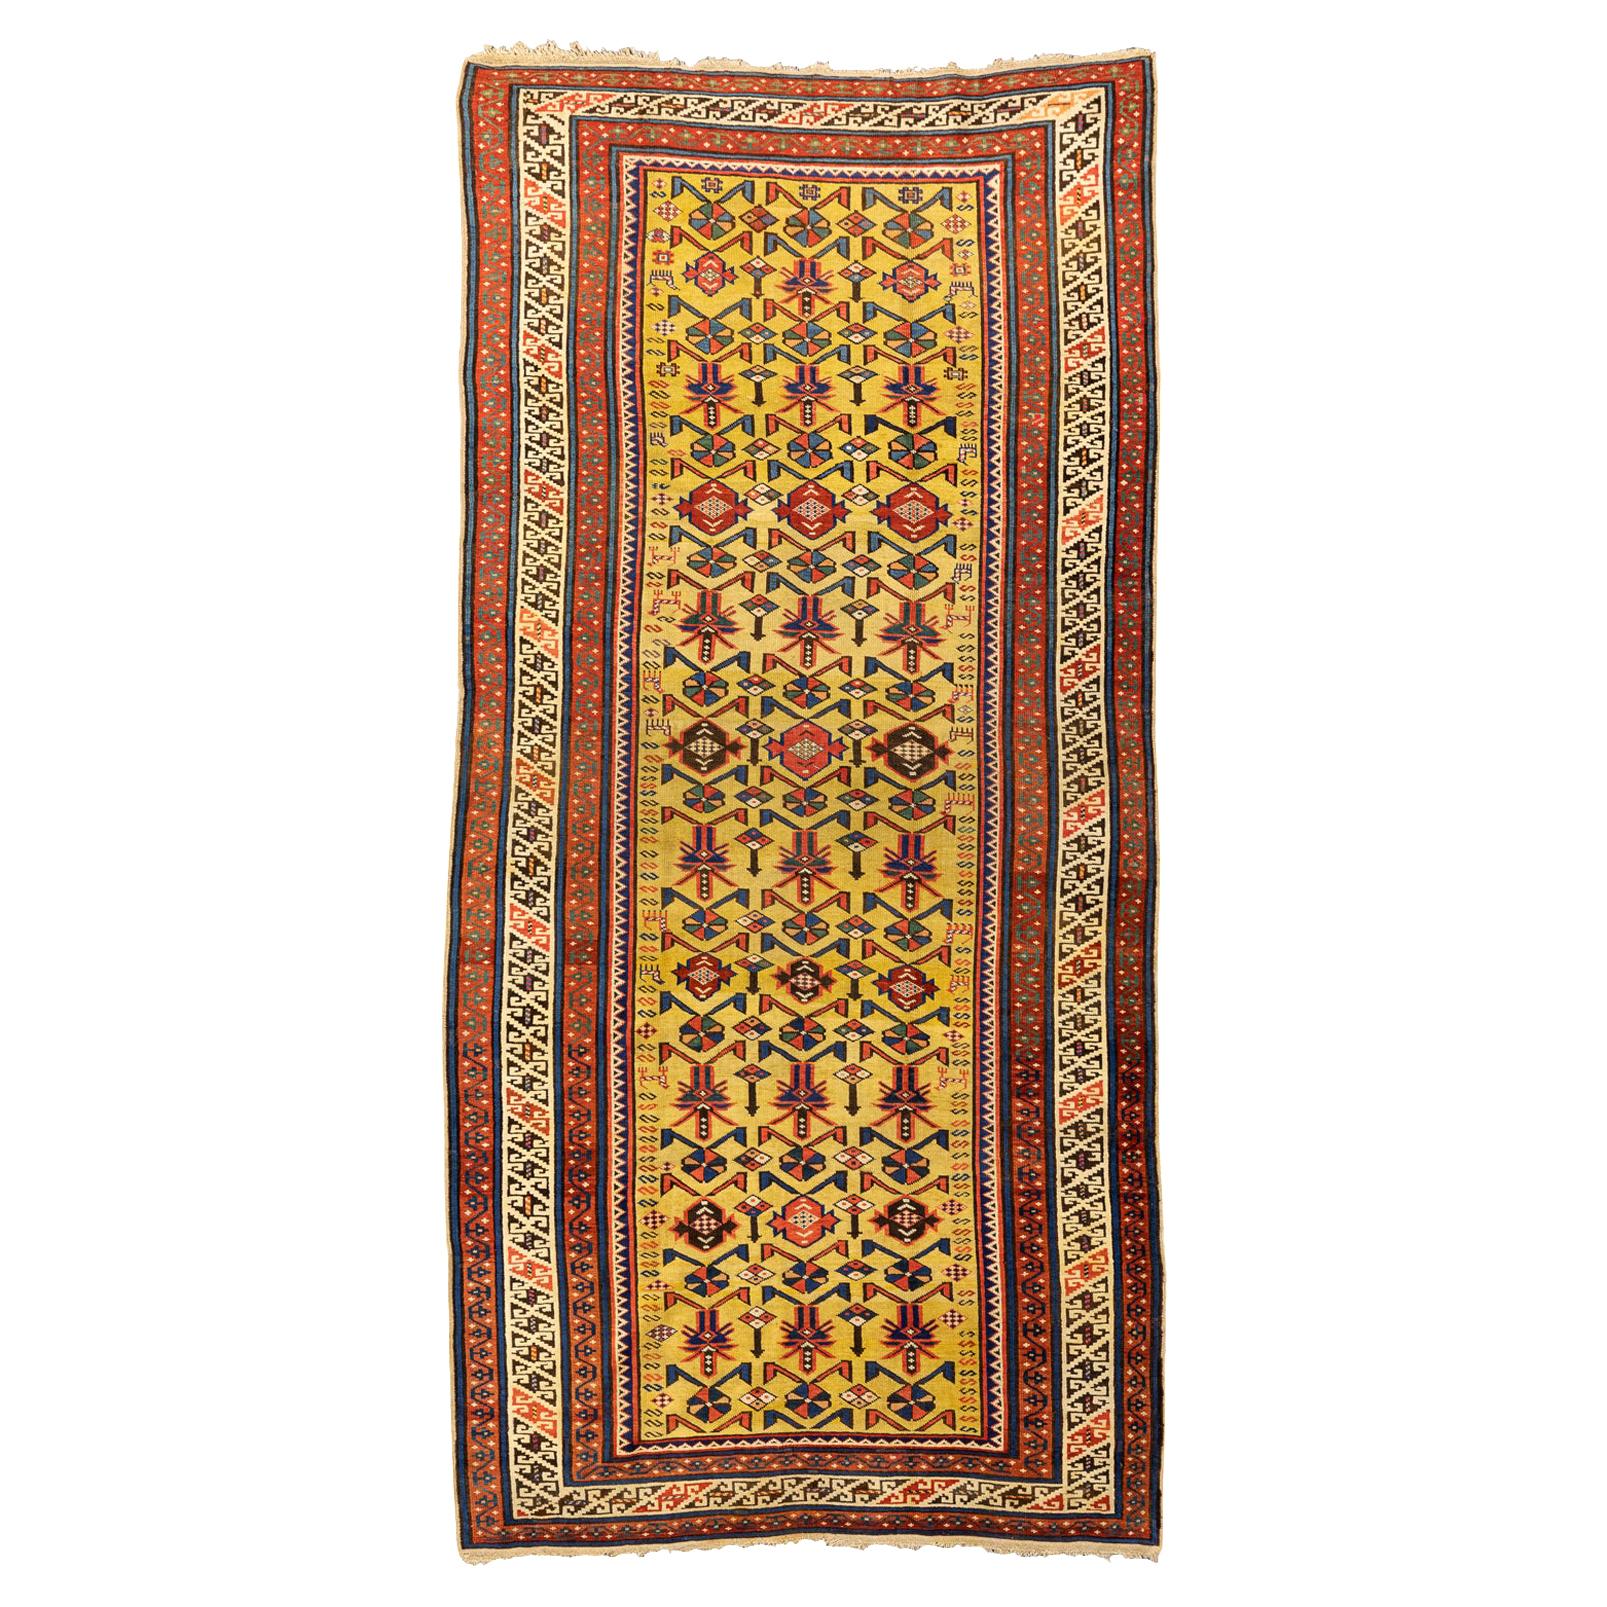 All-Over Yellow Field Antique Caucasian Kuba Wool Rug, Late 19th Century